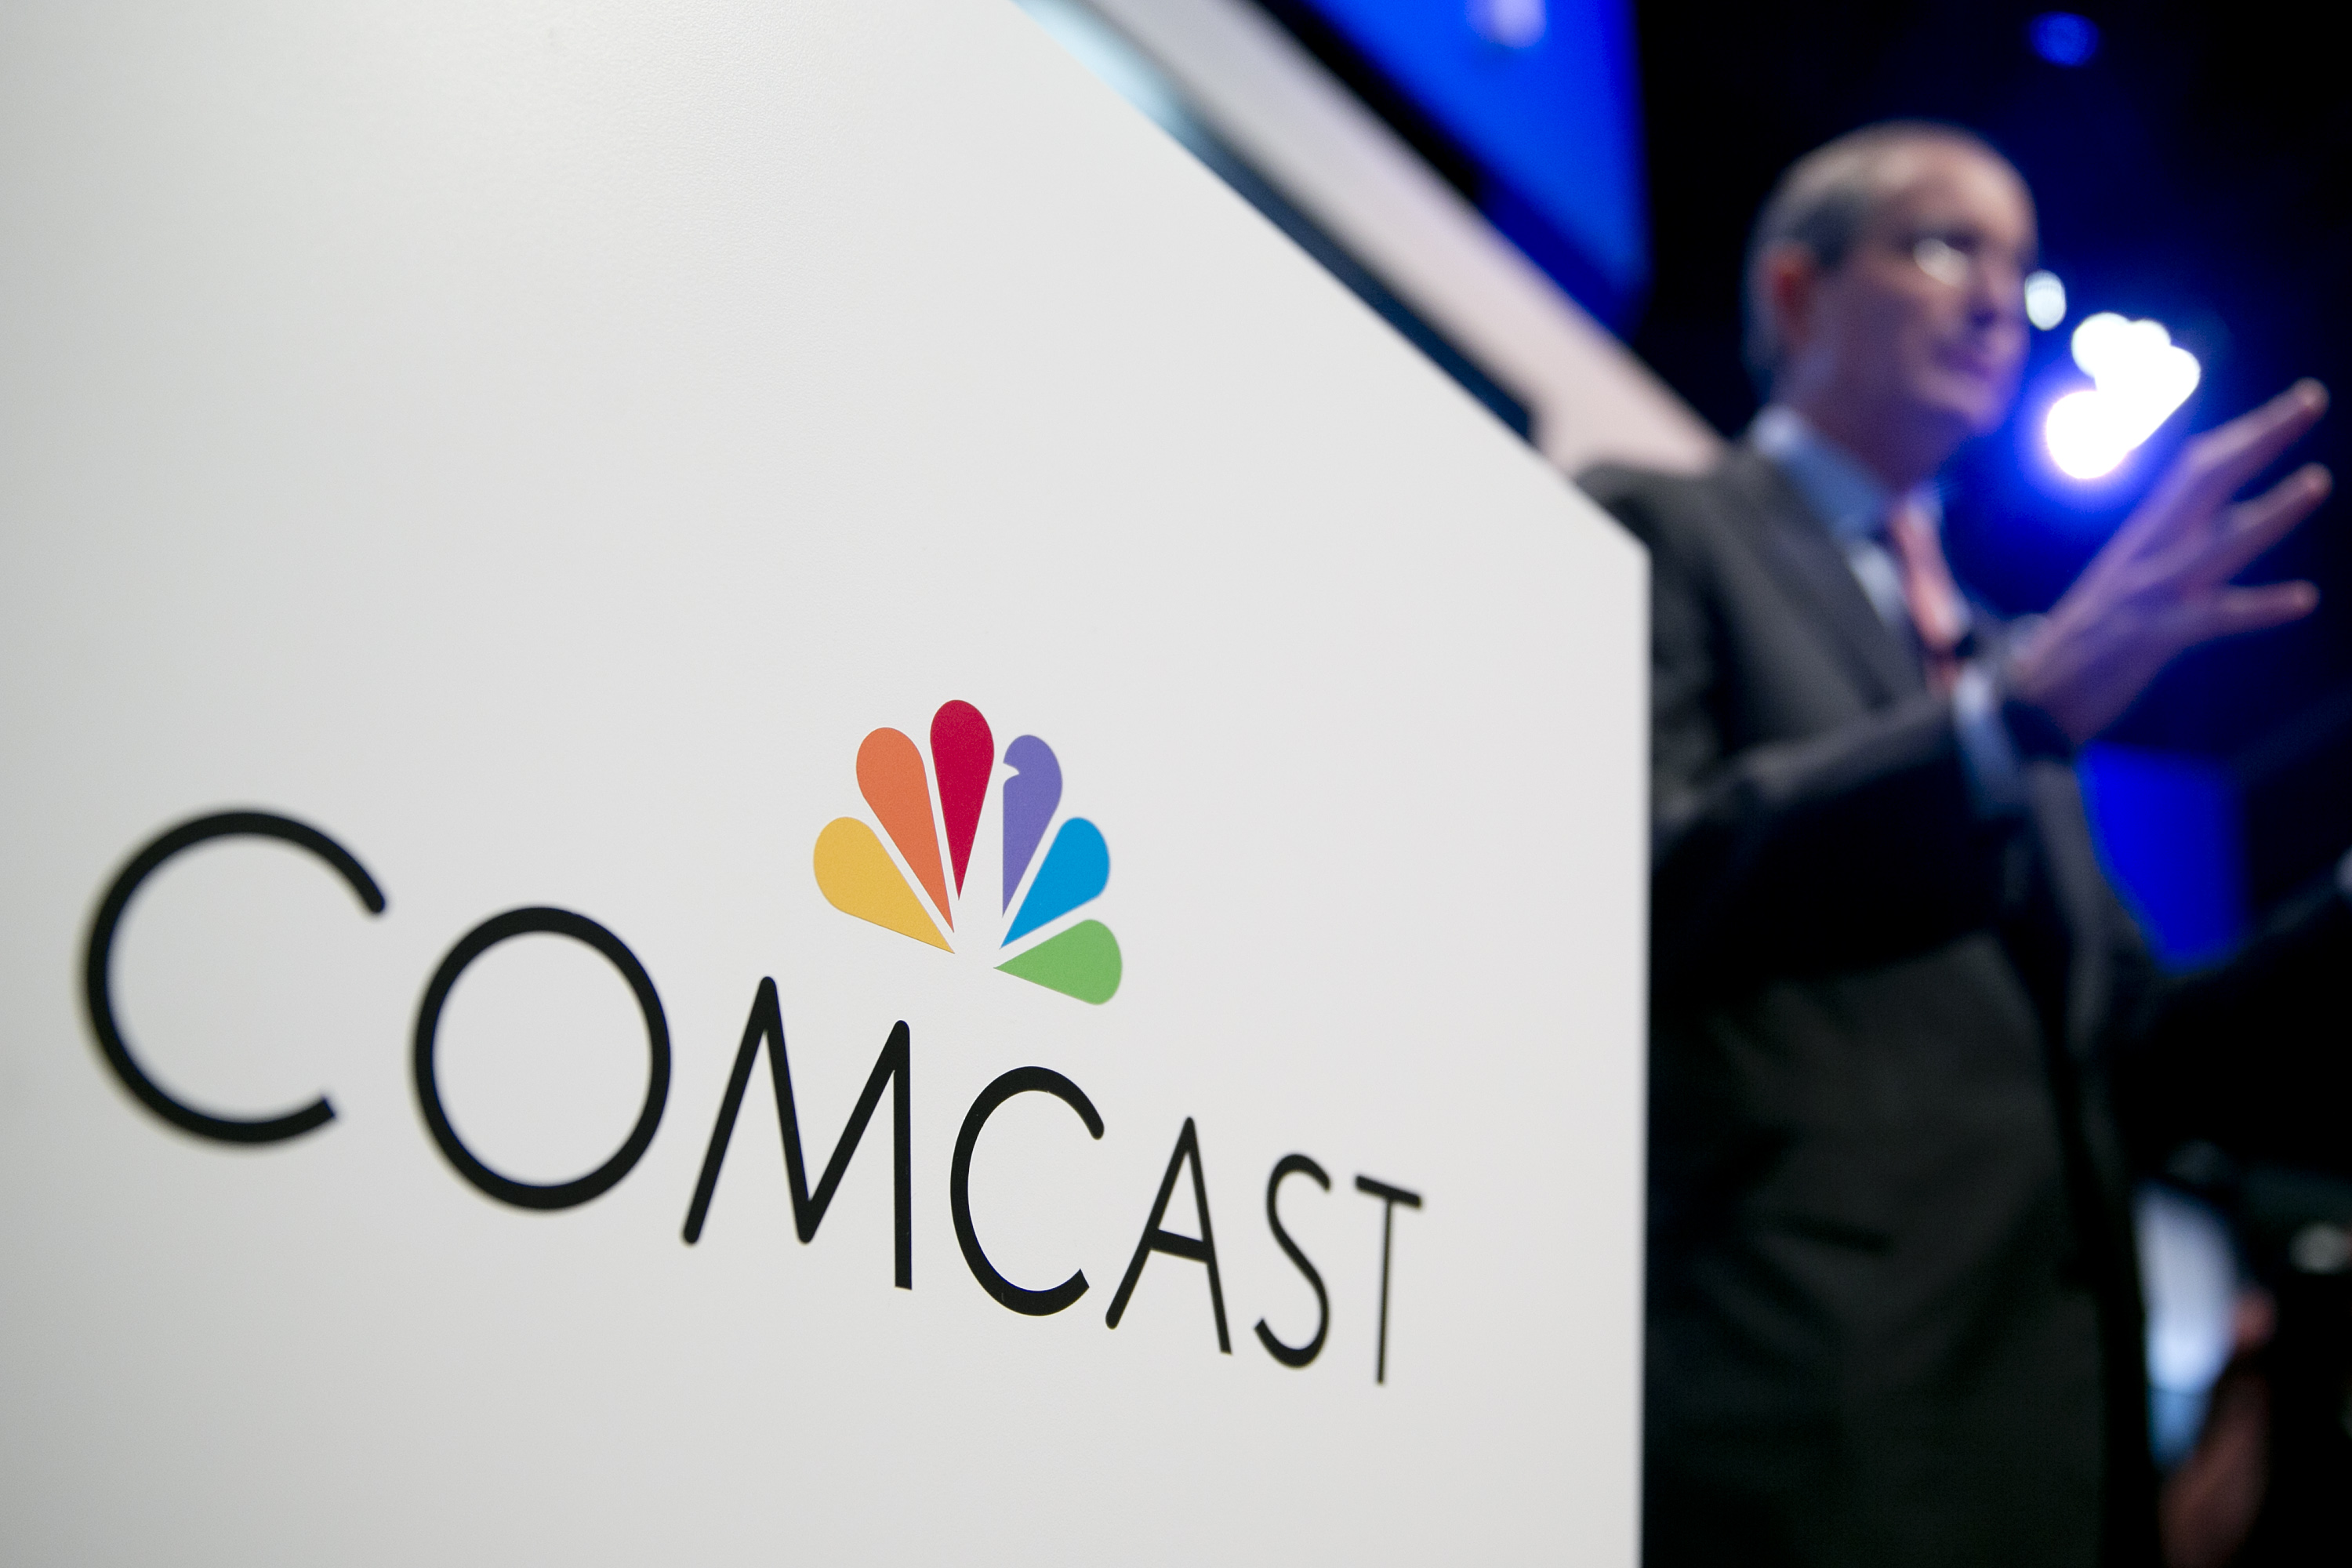 The Comcast Corp. logo is seen as Brian Roberts, chairman and chief executive officer of Comcast Corp., right, speaks during a news conference at the National Cable and Telecommunications Association (NCTA) Cable Show in Washington, D.C., U.S., on Tuesday, June 11, 2013. (Bloomberg—Bloomberg via Getty Images)